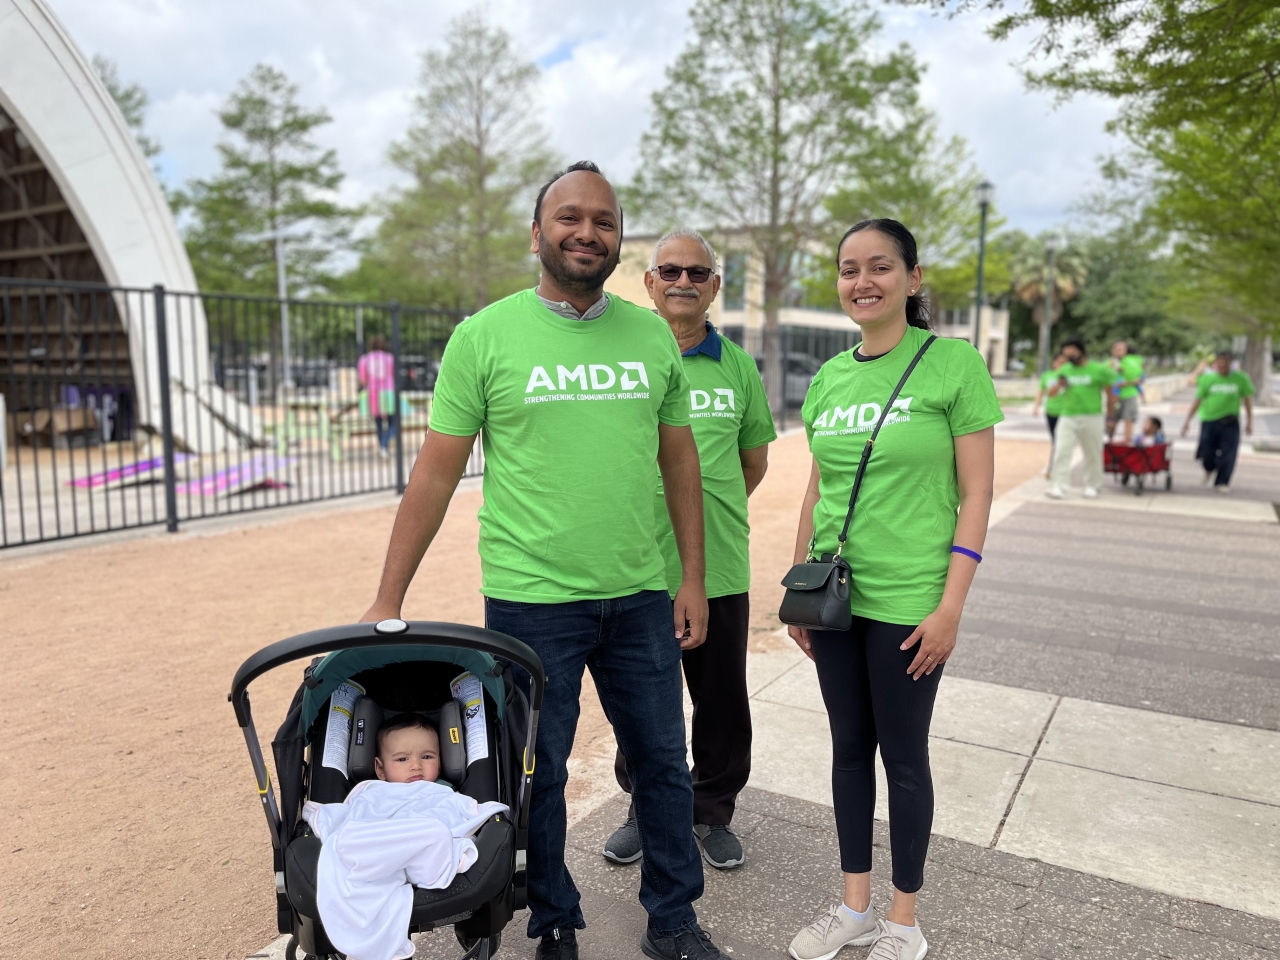 3 AMD employees and a baby